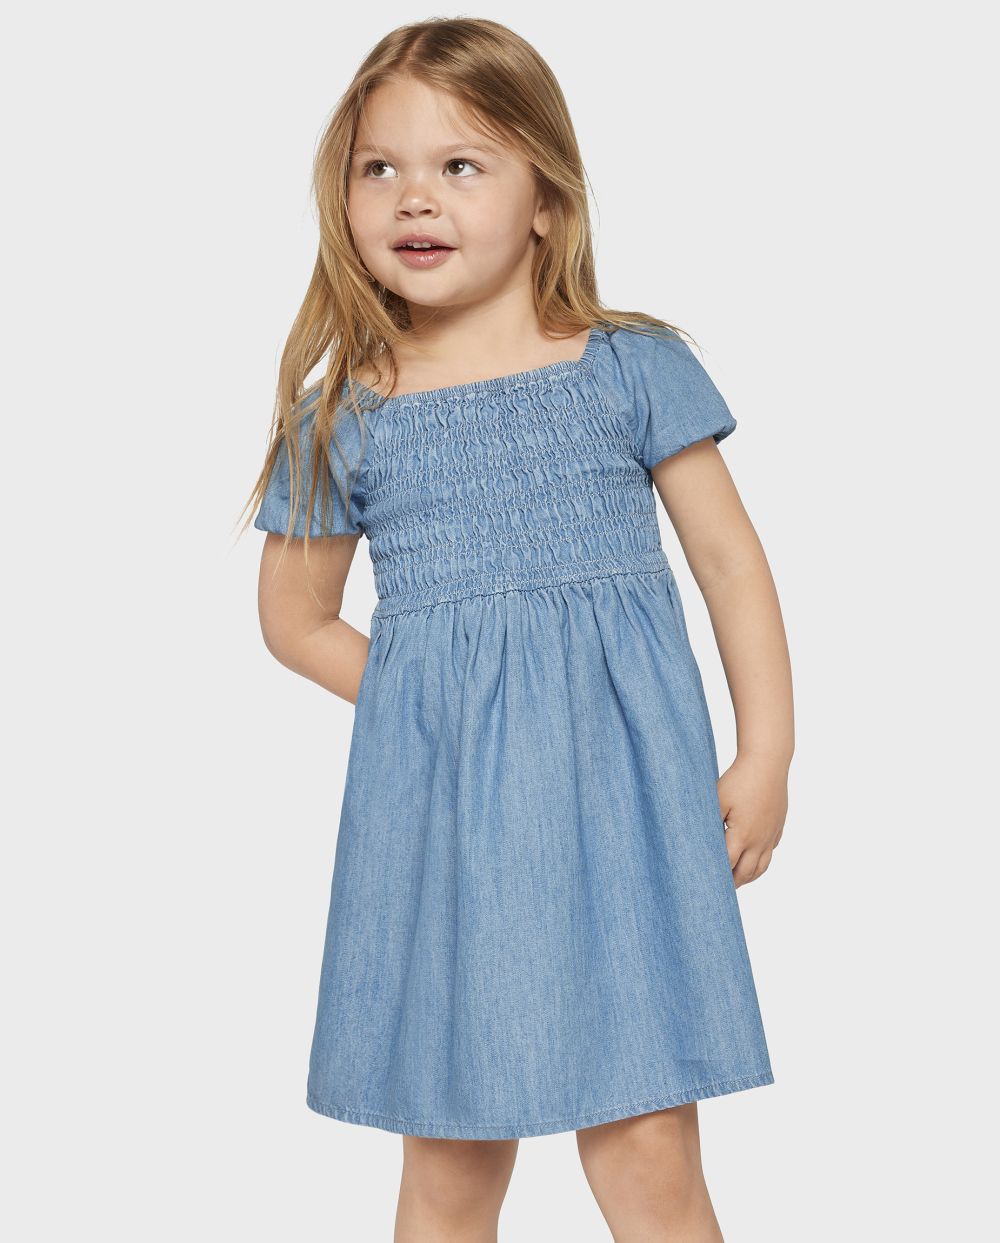 Toddler Puff Sleeves Short Sleeves Sleeves Smocked Square Neck Above the Knee Dress